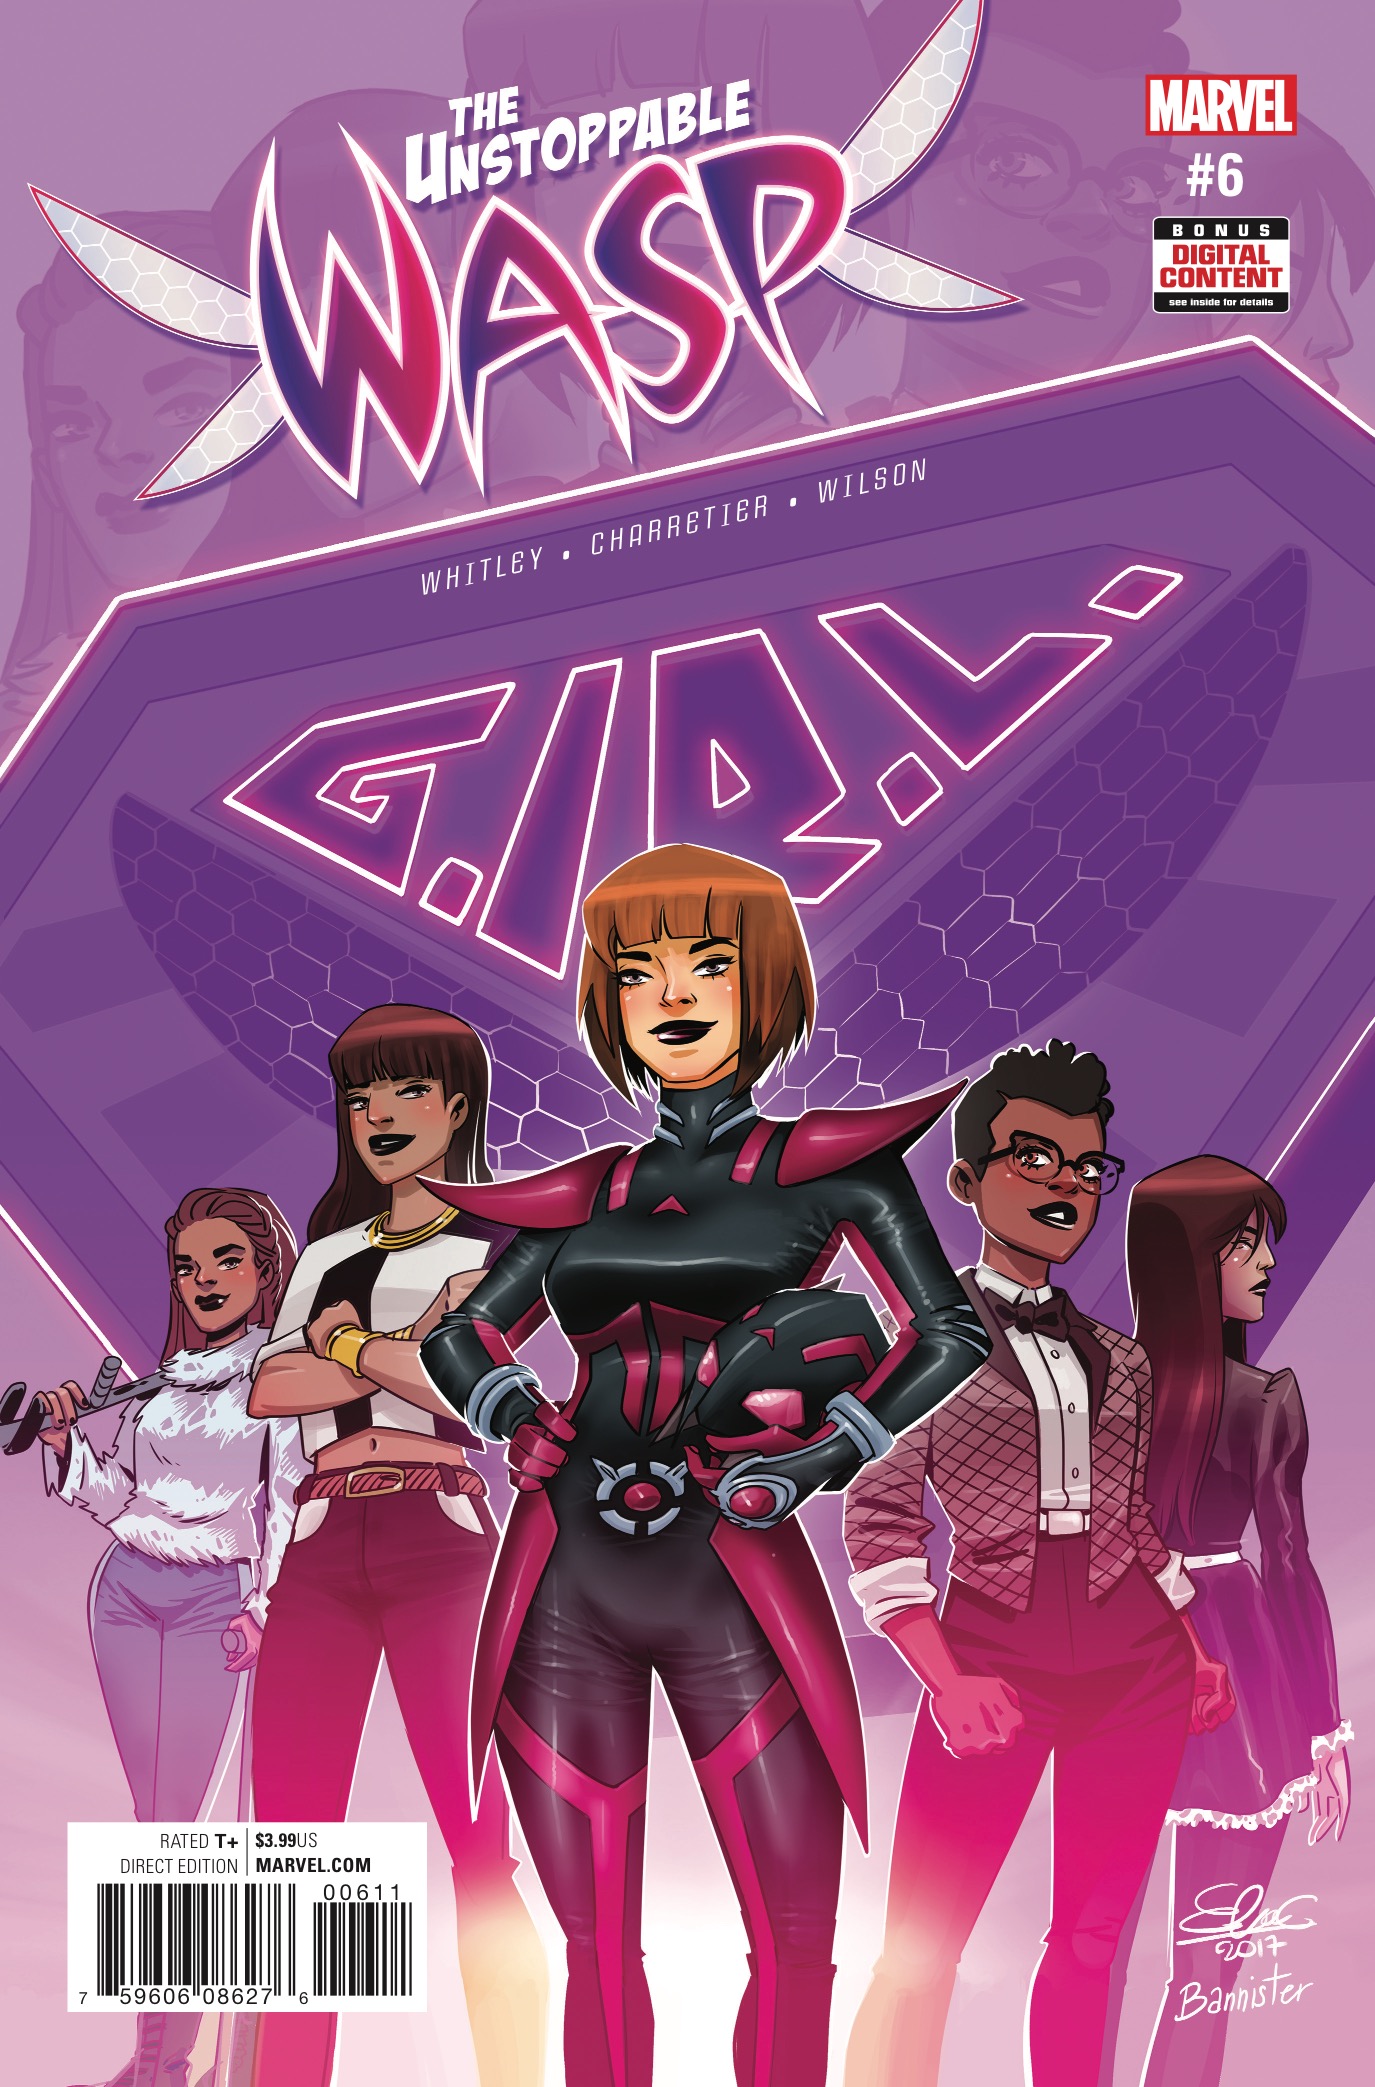 The Unstoppable Wasp #6 Review